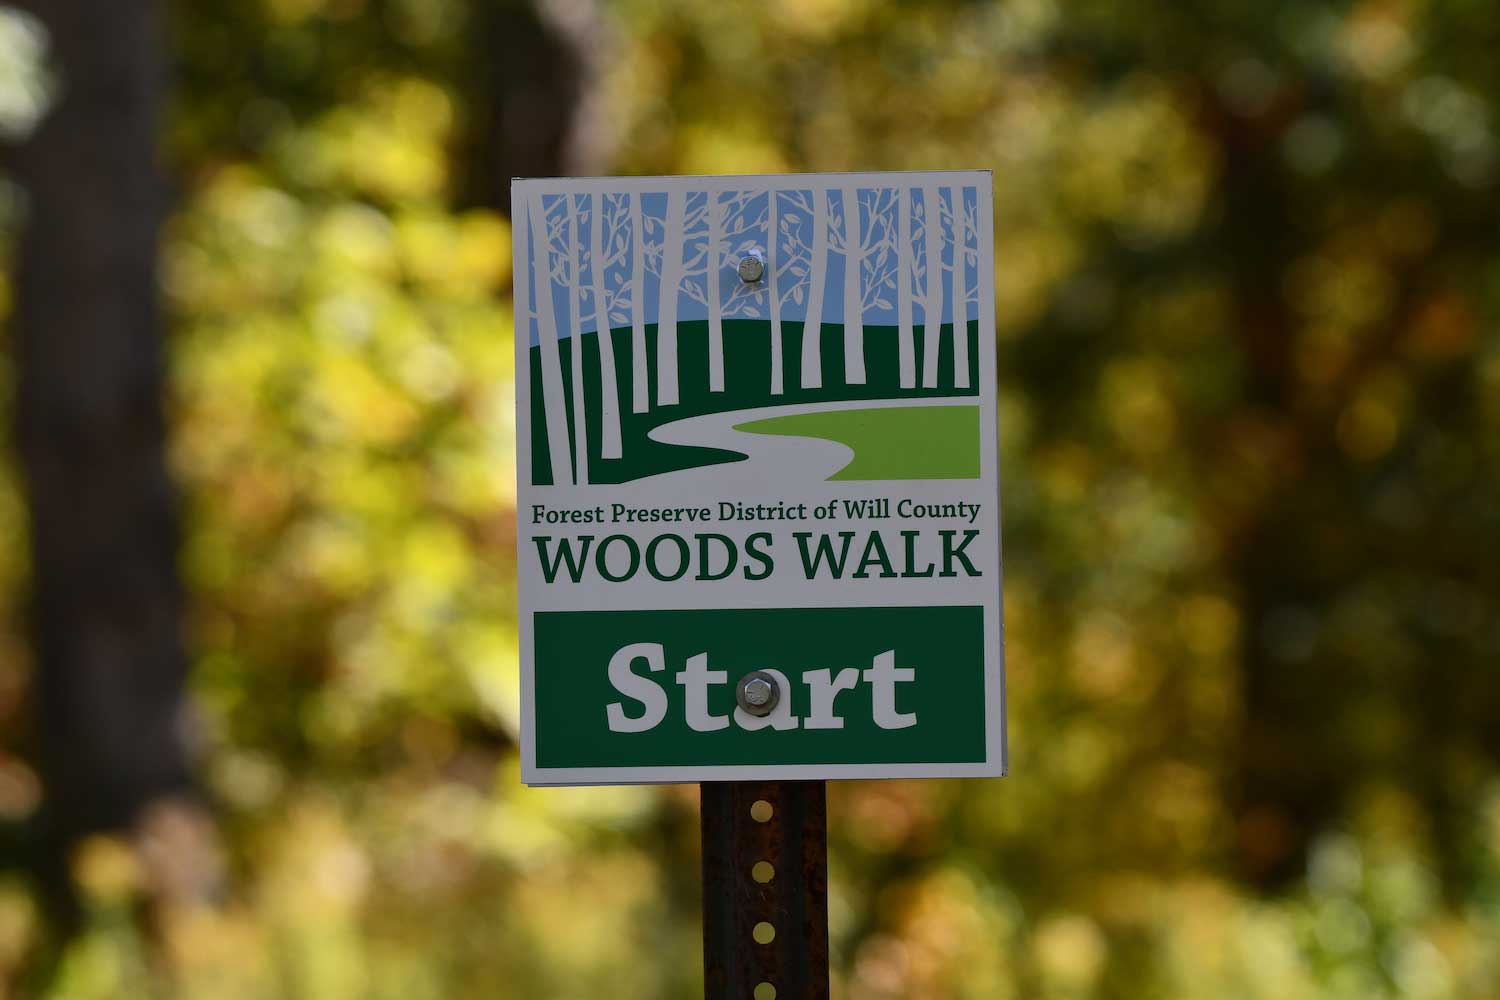 A Woods Walk sign in front of trees.